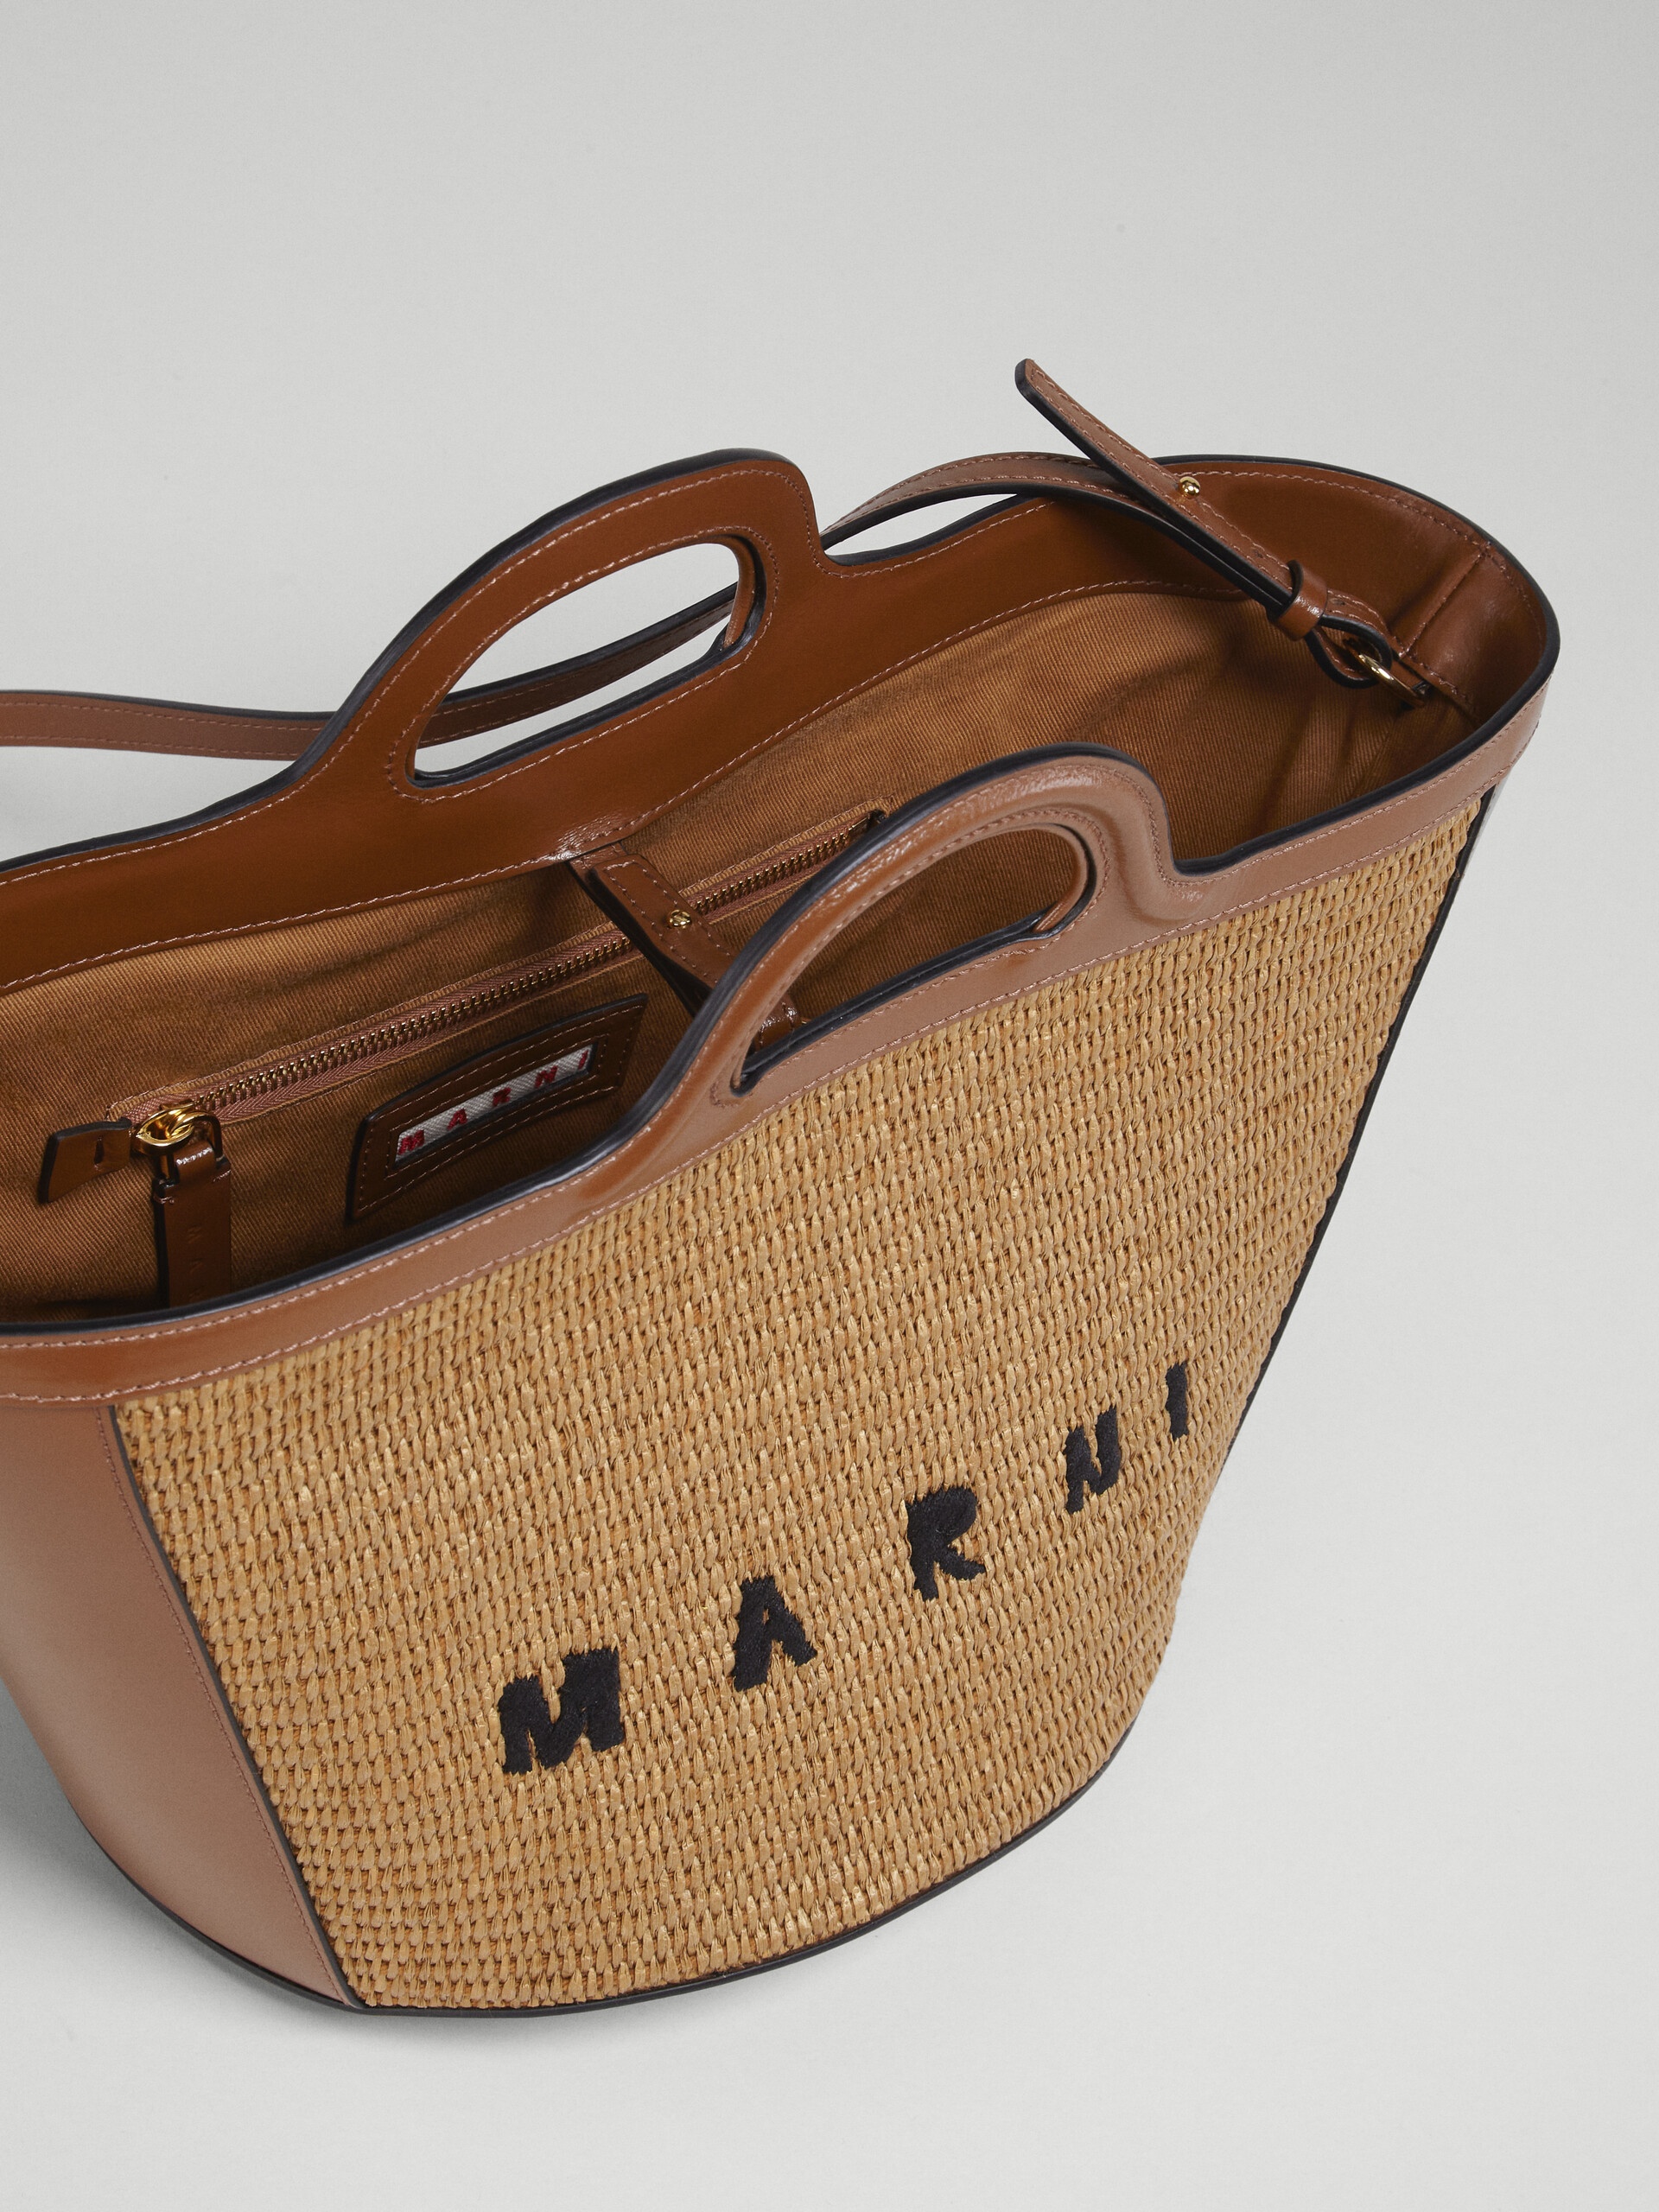 TROPICALIA SMALL BAG IN BROWN LEATHER AND RAFFIA - 5